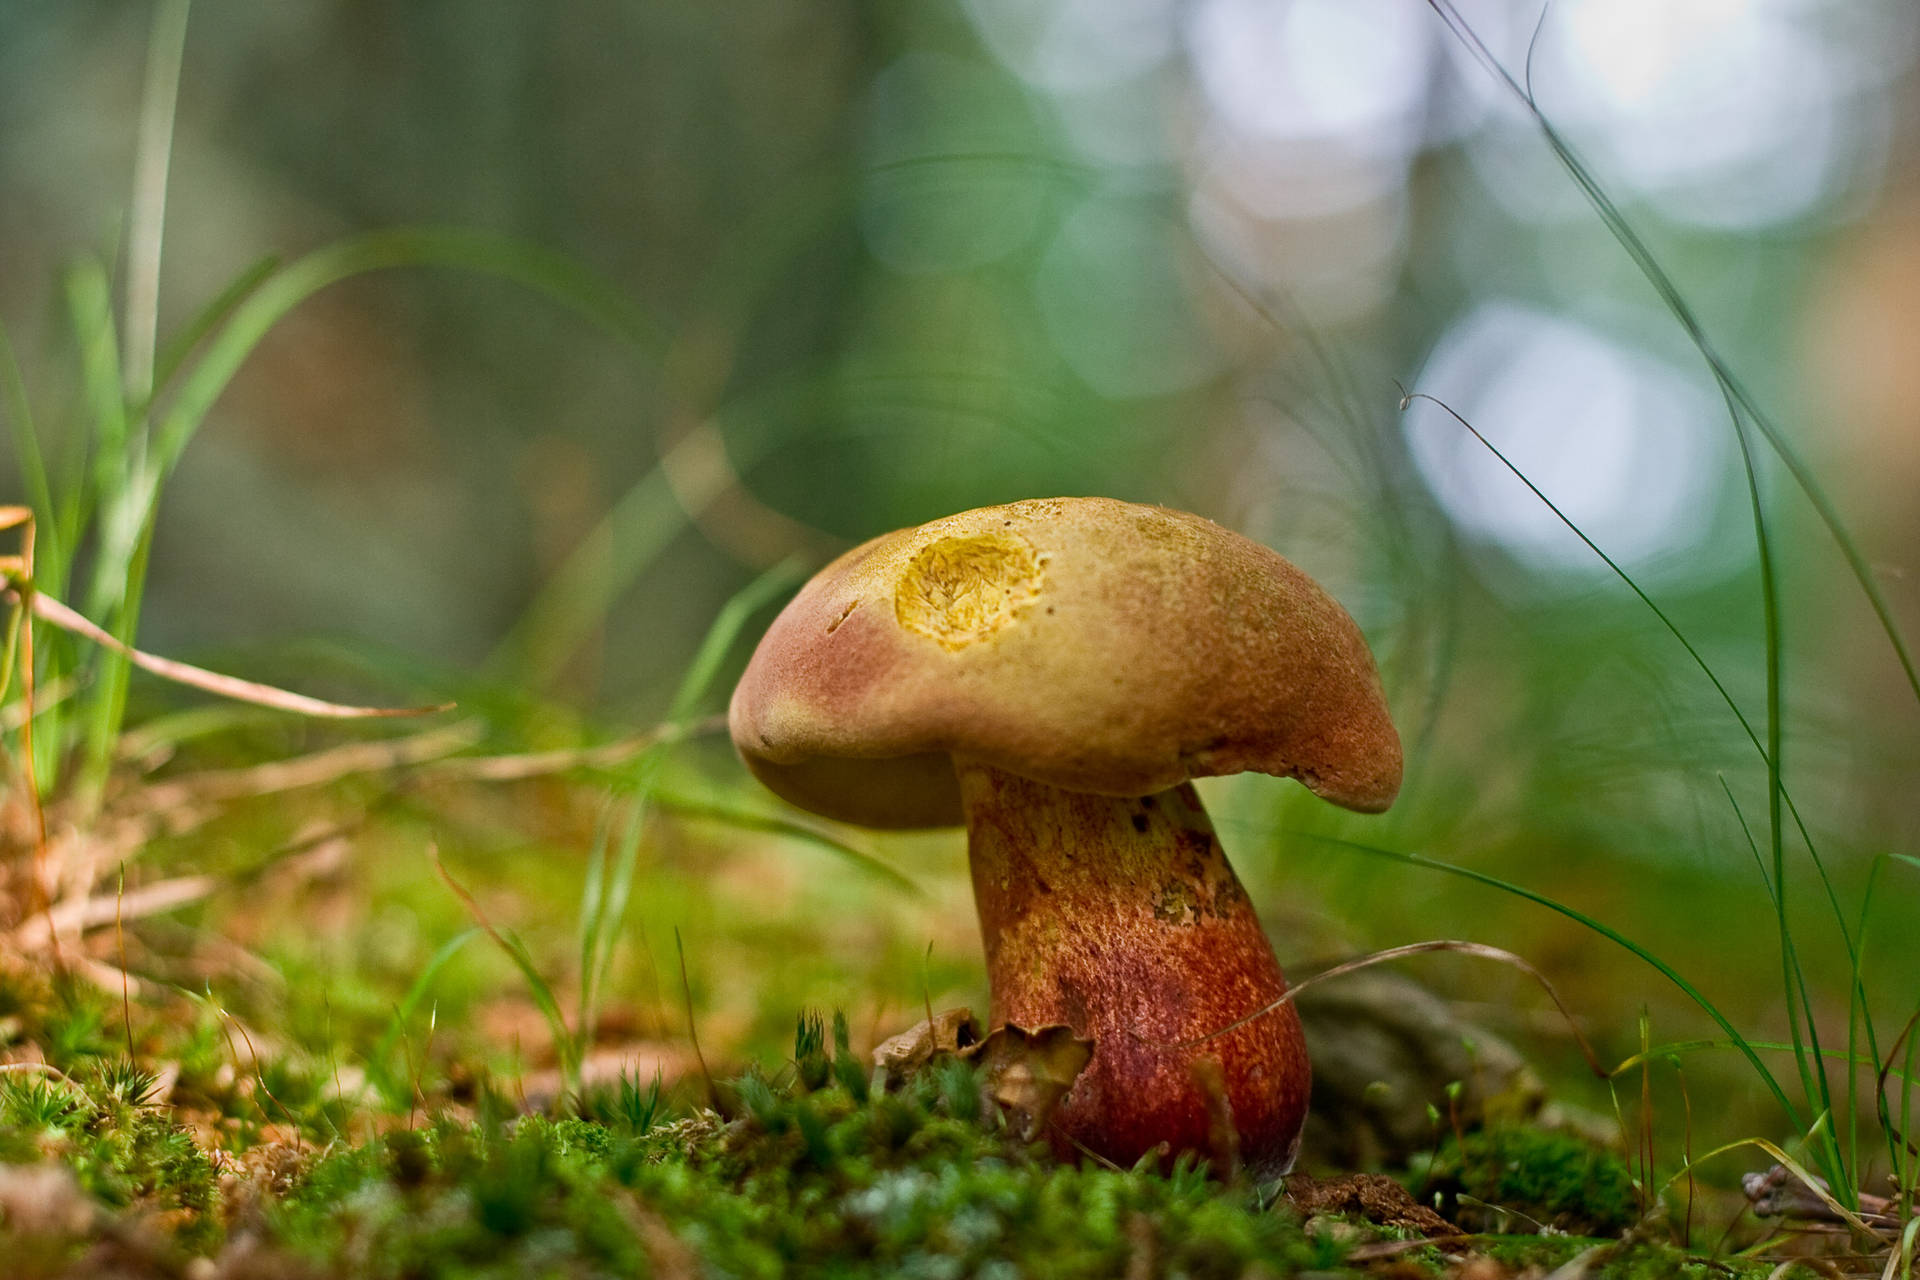 Cute Brown And Yellow Mushroom On Grass